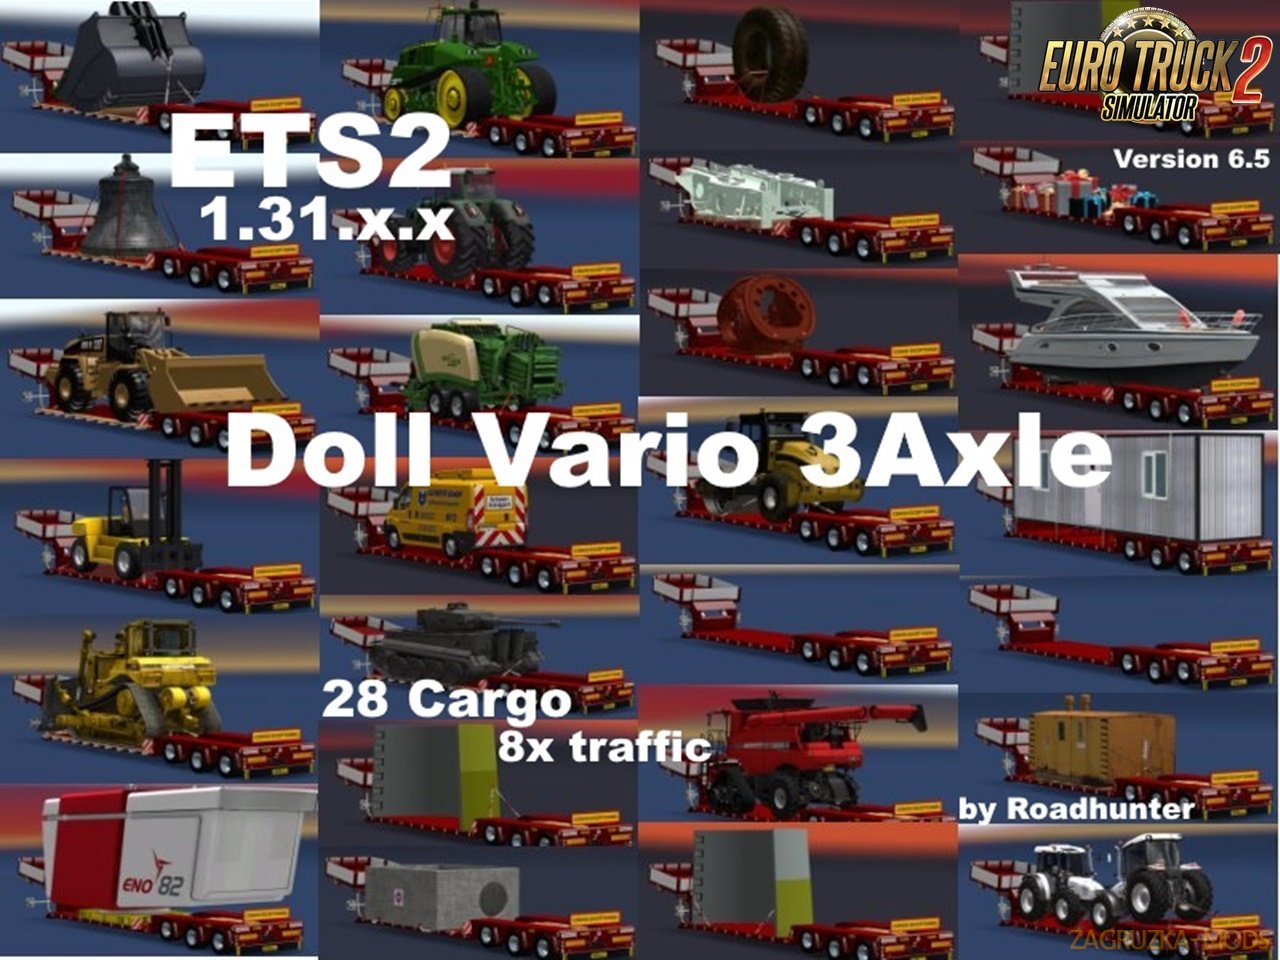 Doll Vario 3Achs with new backlight and in Traffic v6.5.1 by Roadhunter